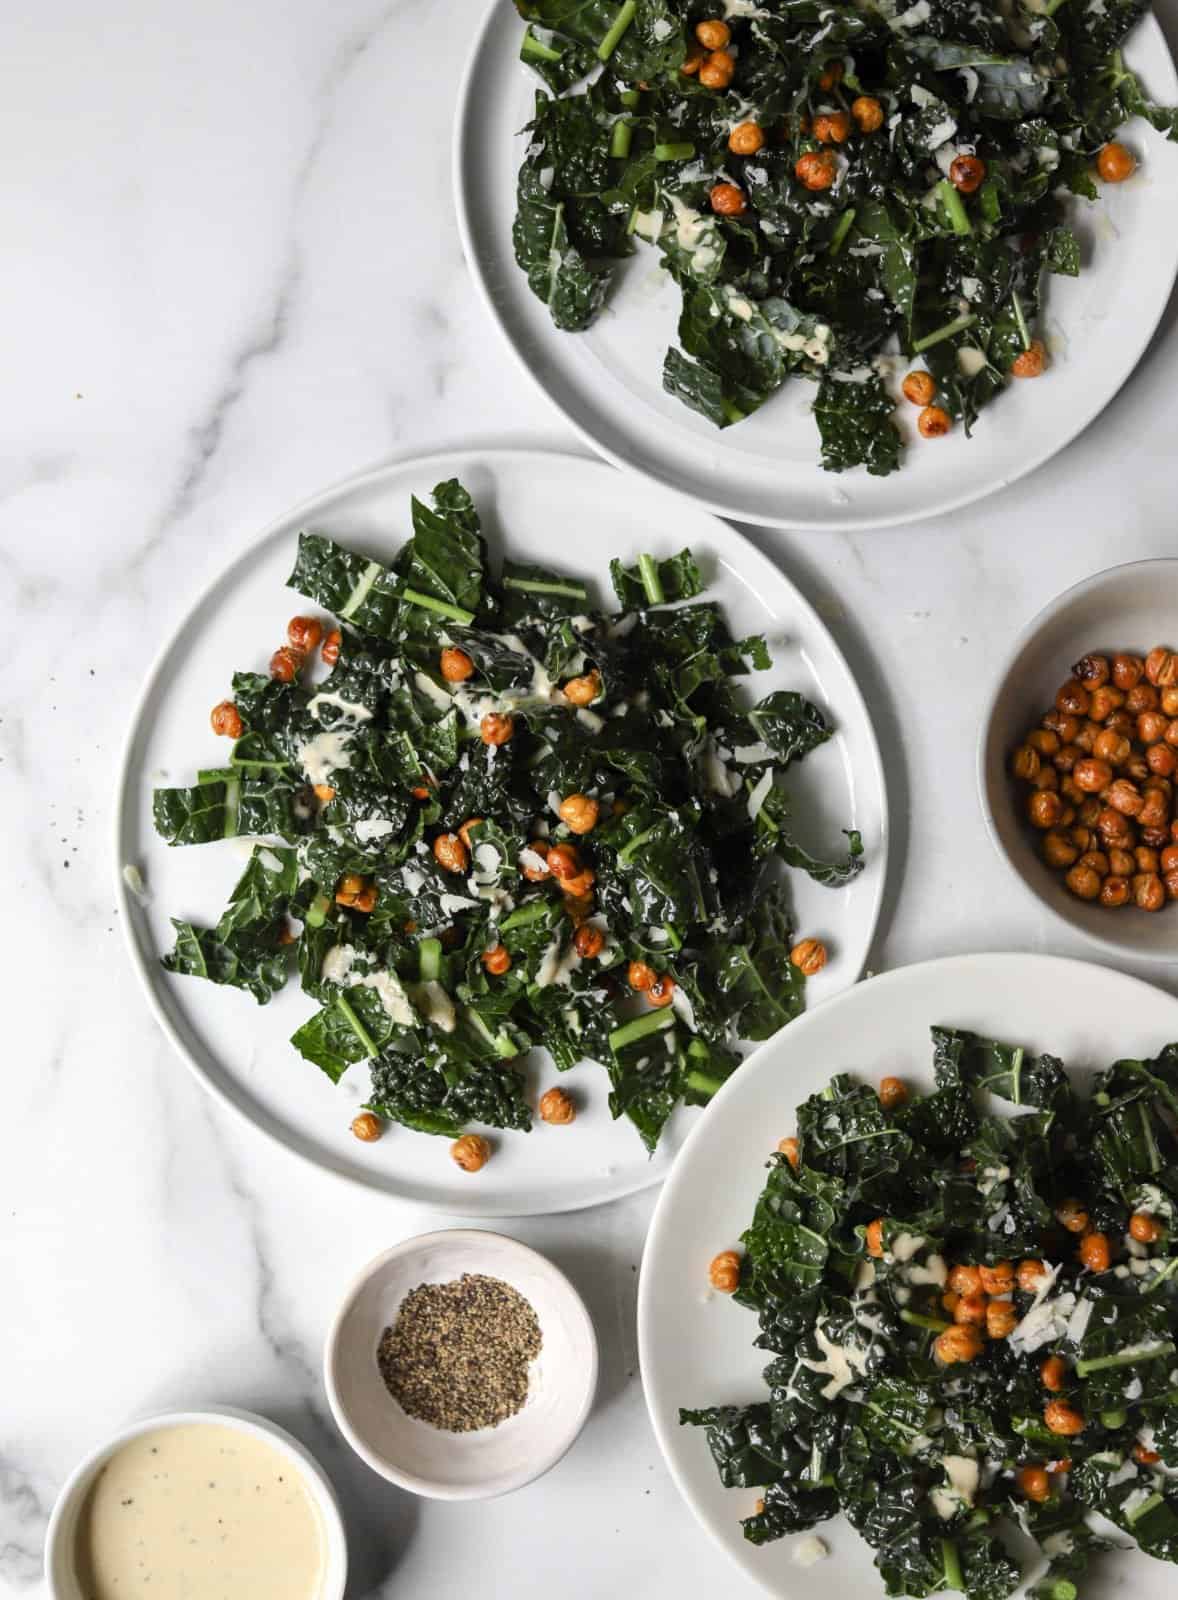 Kale & Crispy Chickpea Caesar Salad as an example of a way to use leafy greens